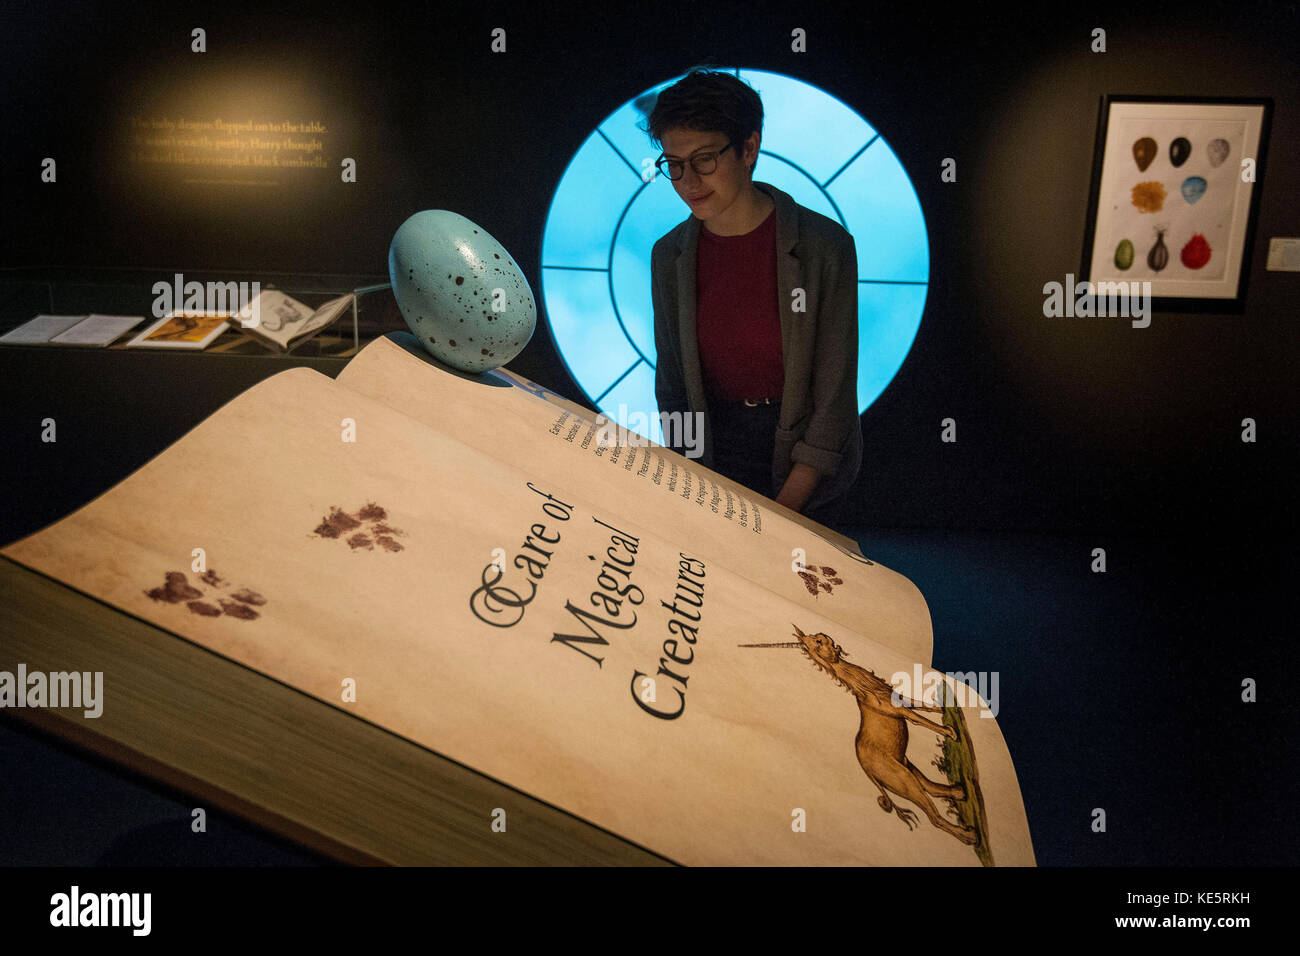 A visitor looks at a book of 'Care of Magical Creatures' during a press preview for the Harry Potter: A History of Magic exhibition at the British Library in London. Stock Photo